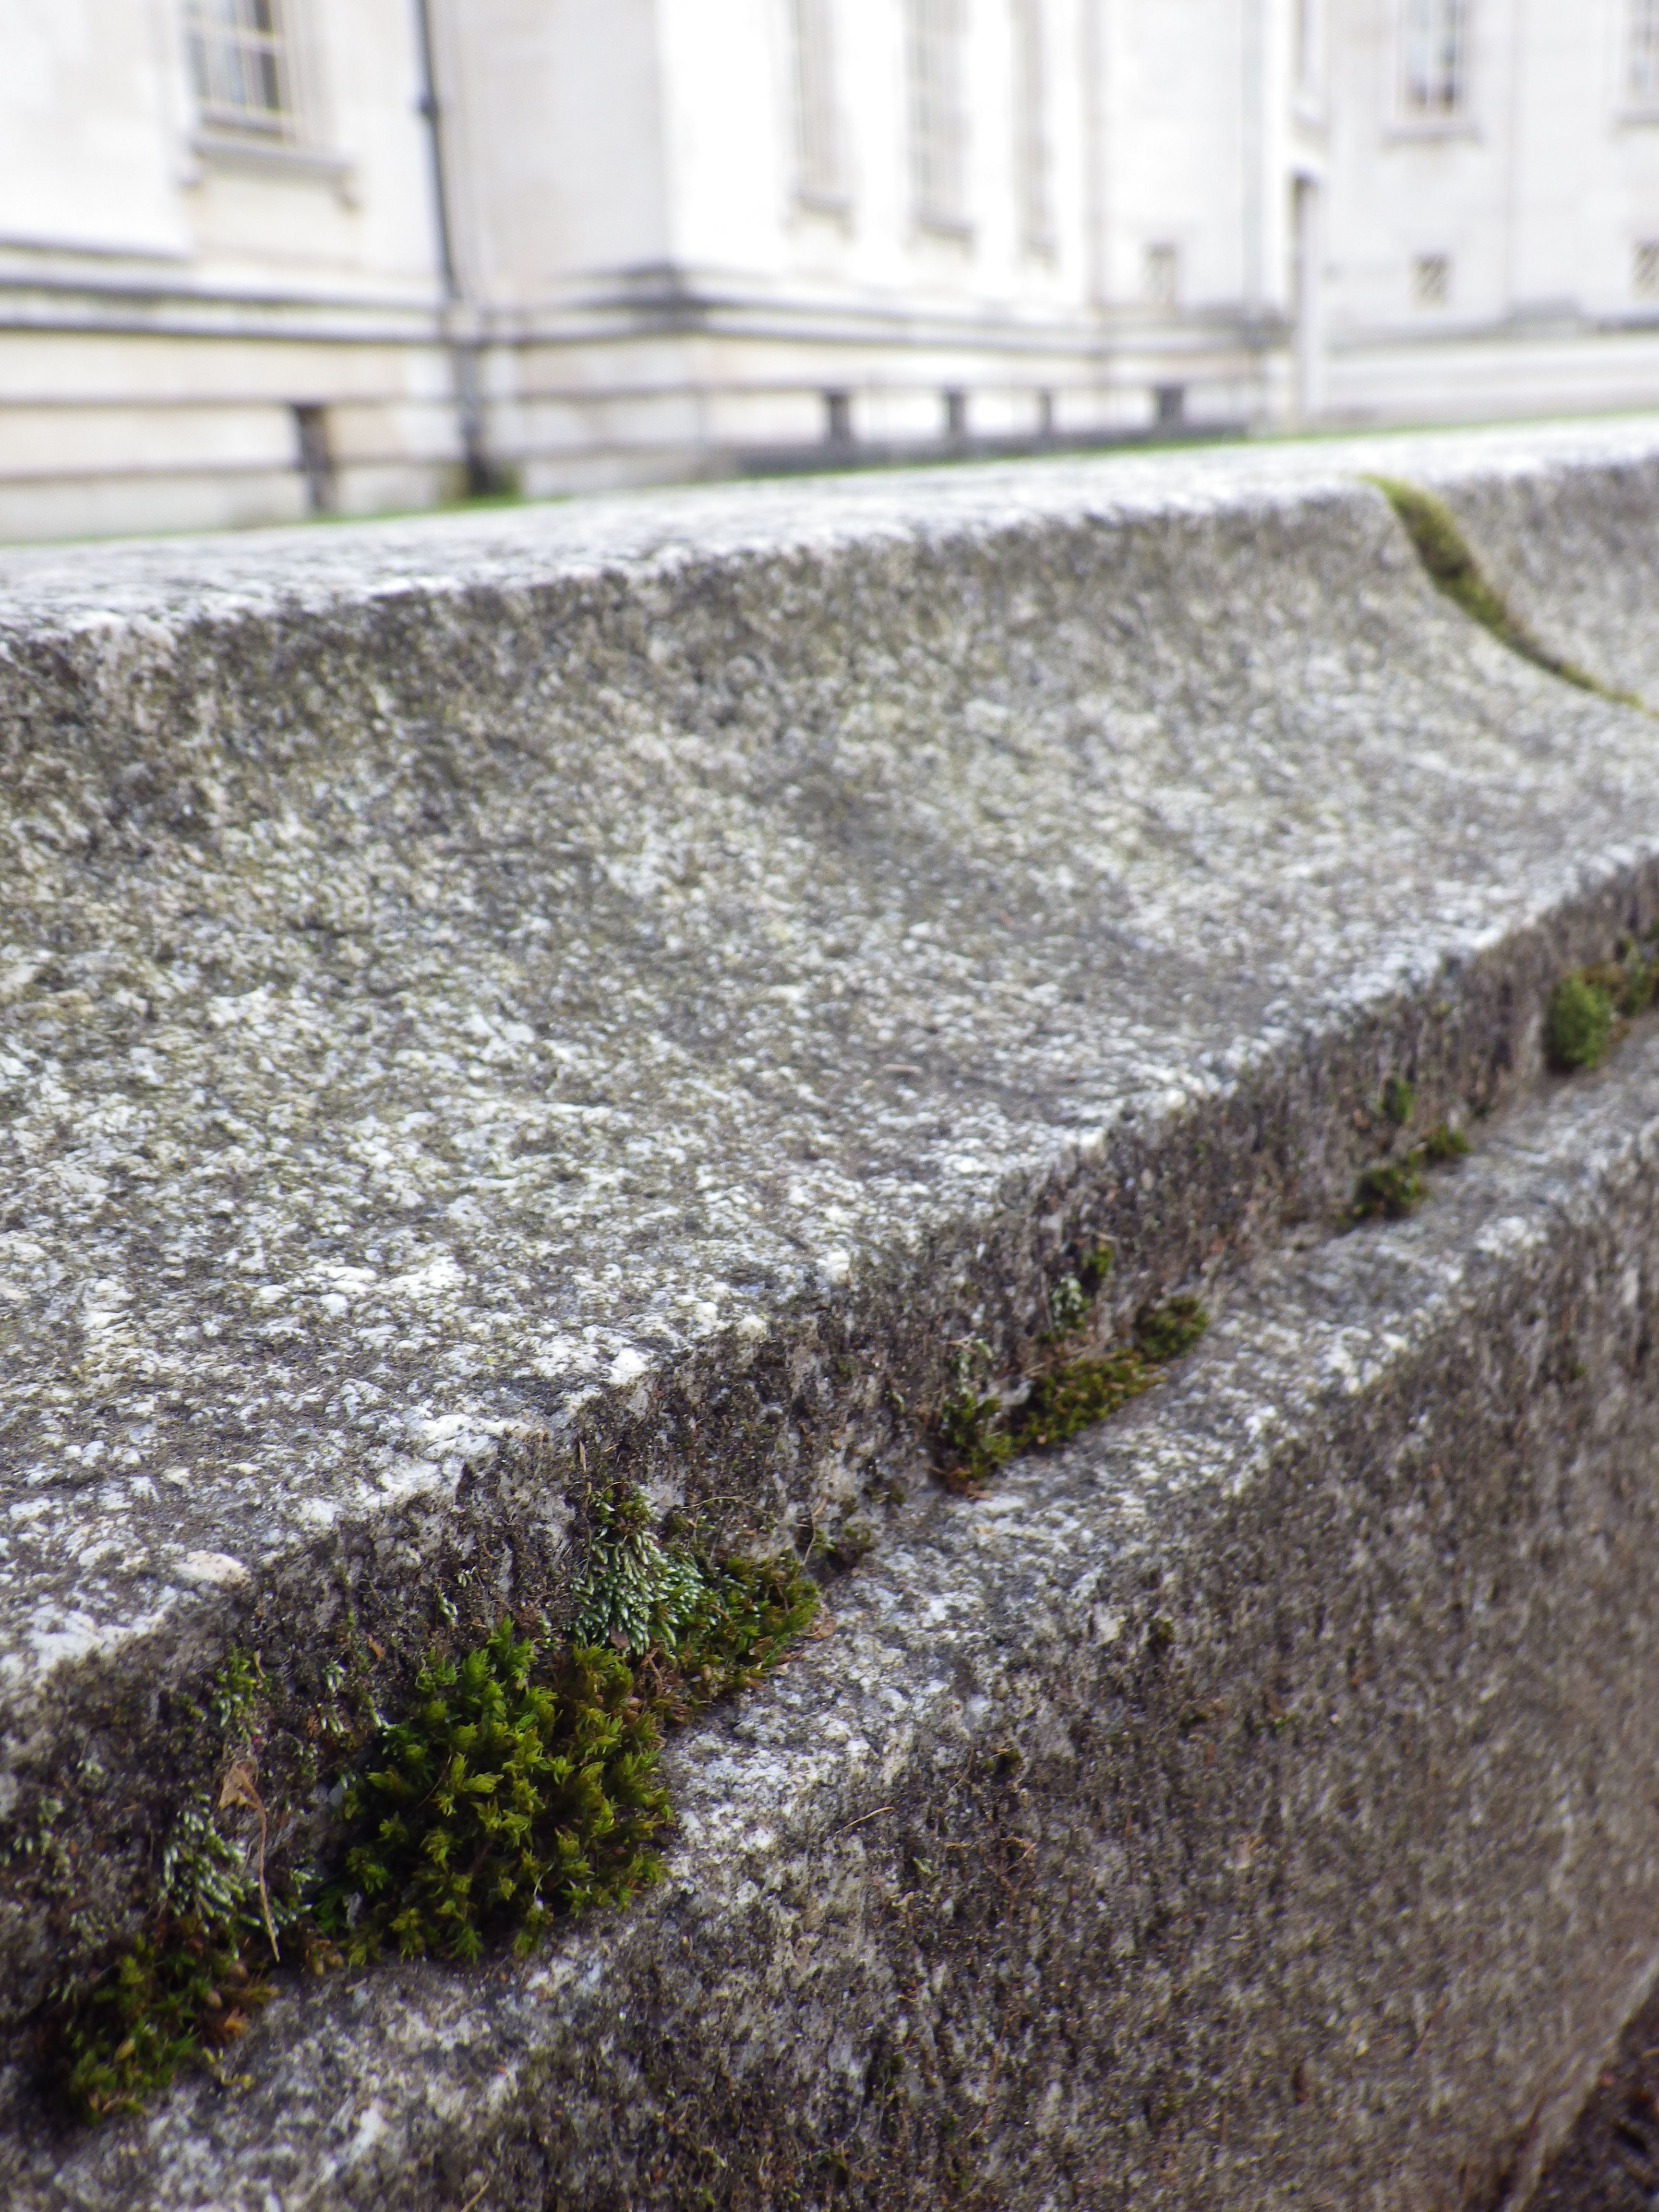 Mosses in their extreme environment on the wall surrounding National Museum Cardiff.